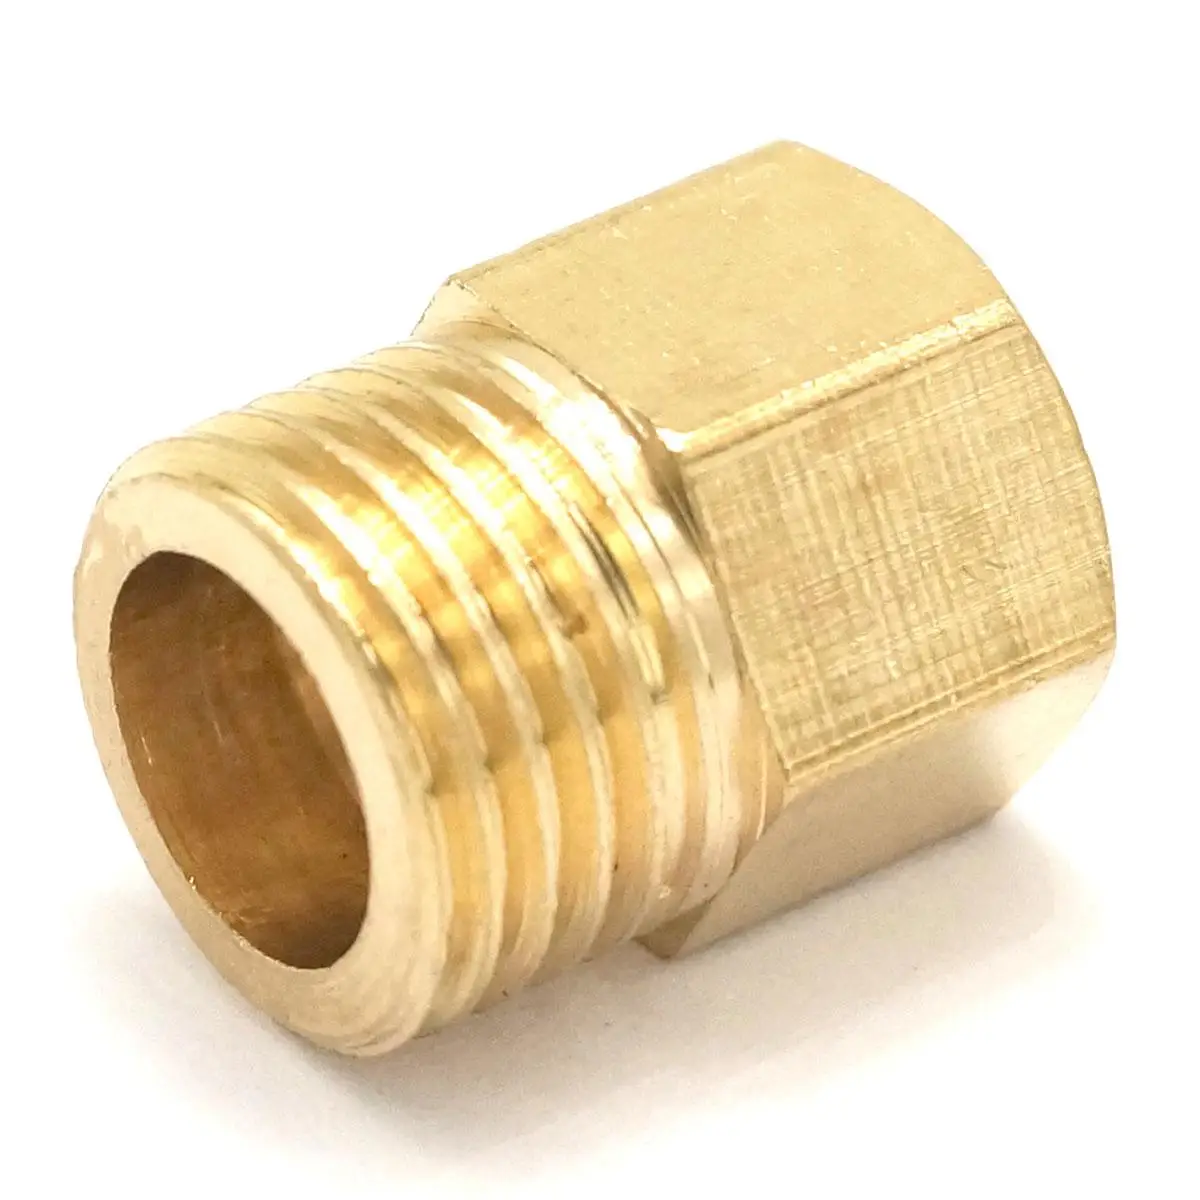 

LOT2 Brass Reducer Hex Head M8x1mm Female to 1/4" BSP Male Thread Reducing Bush Adapter Fitting for Pressure Gauge